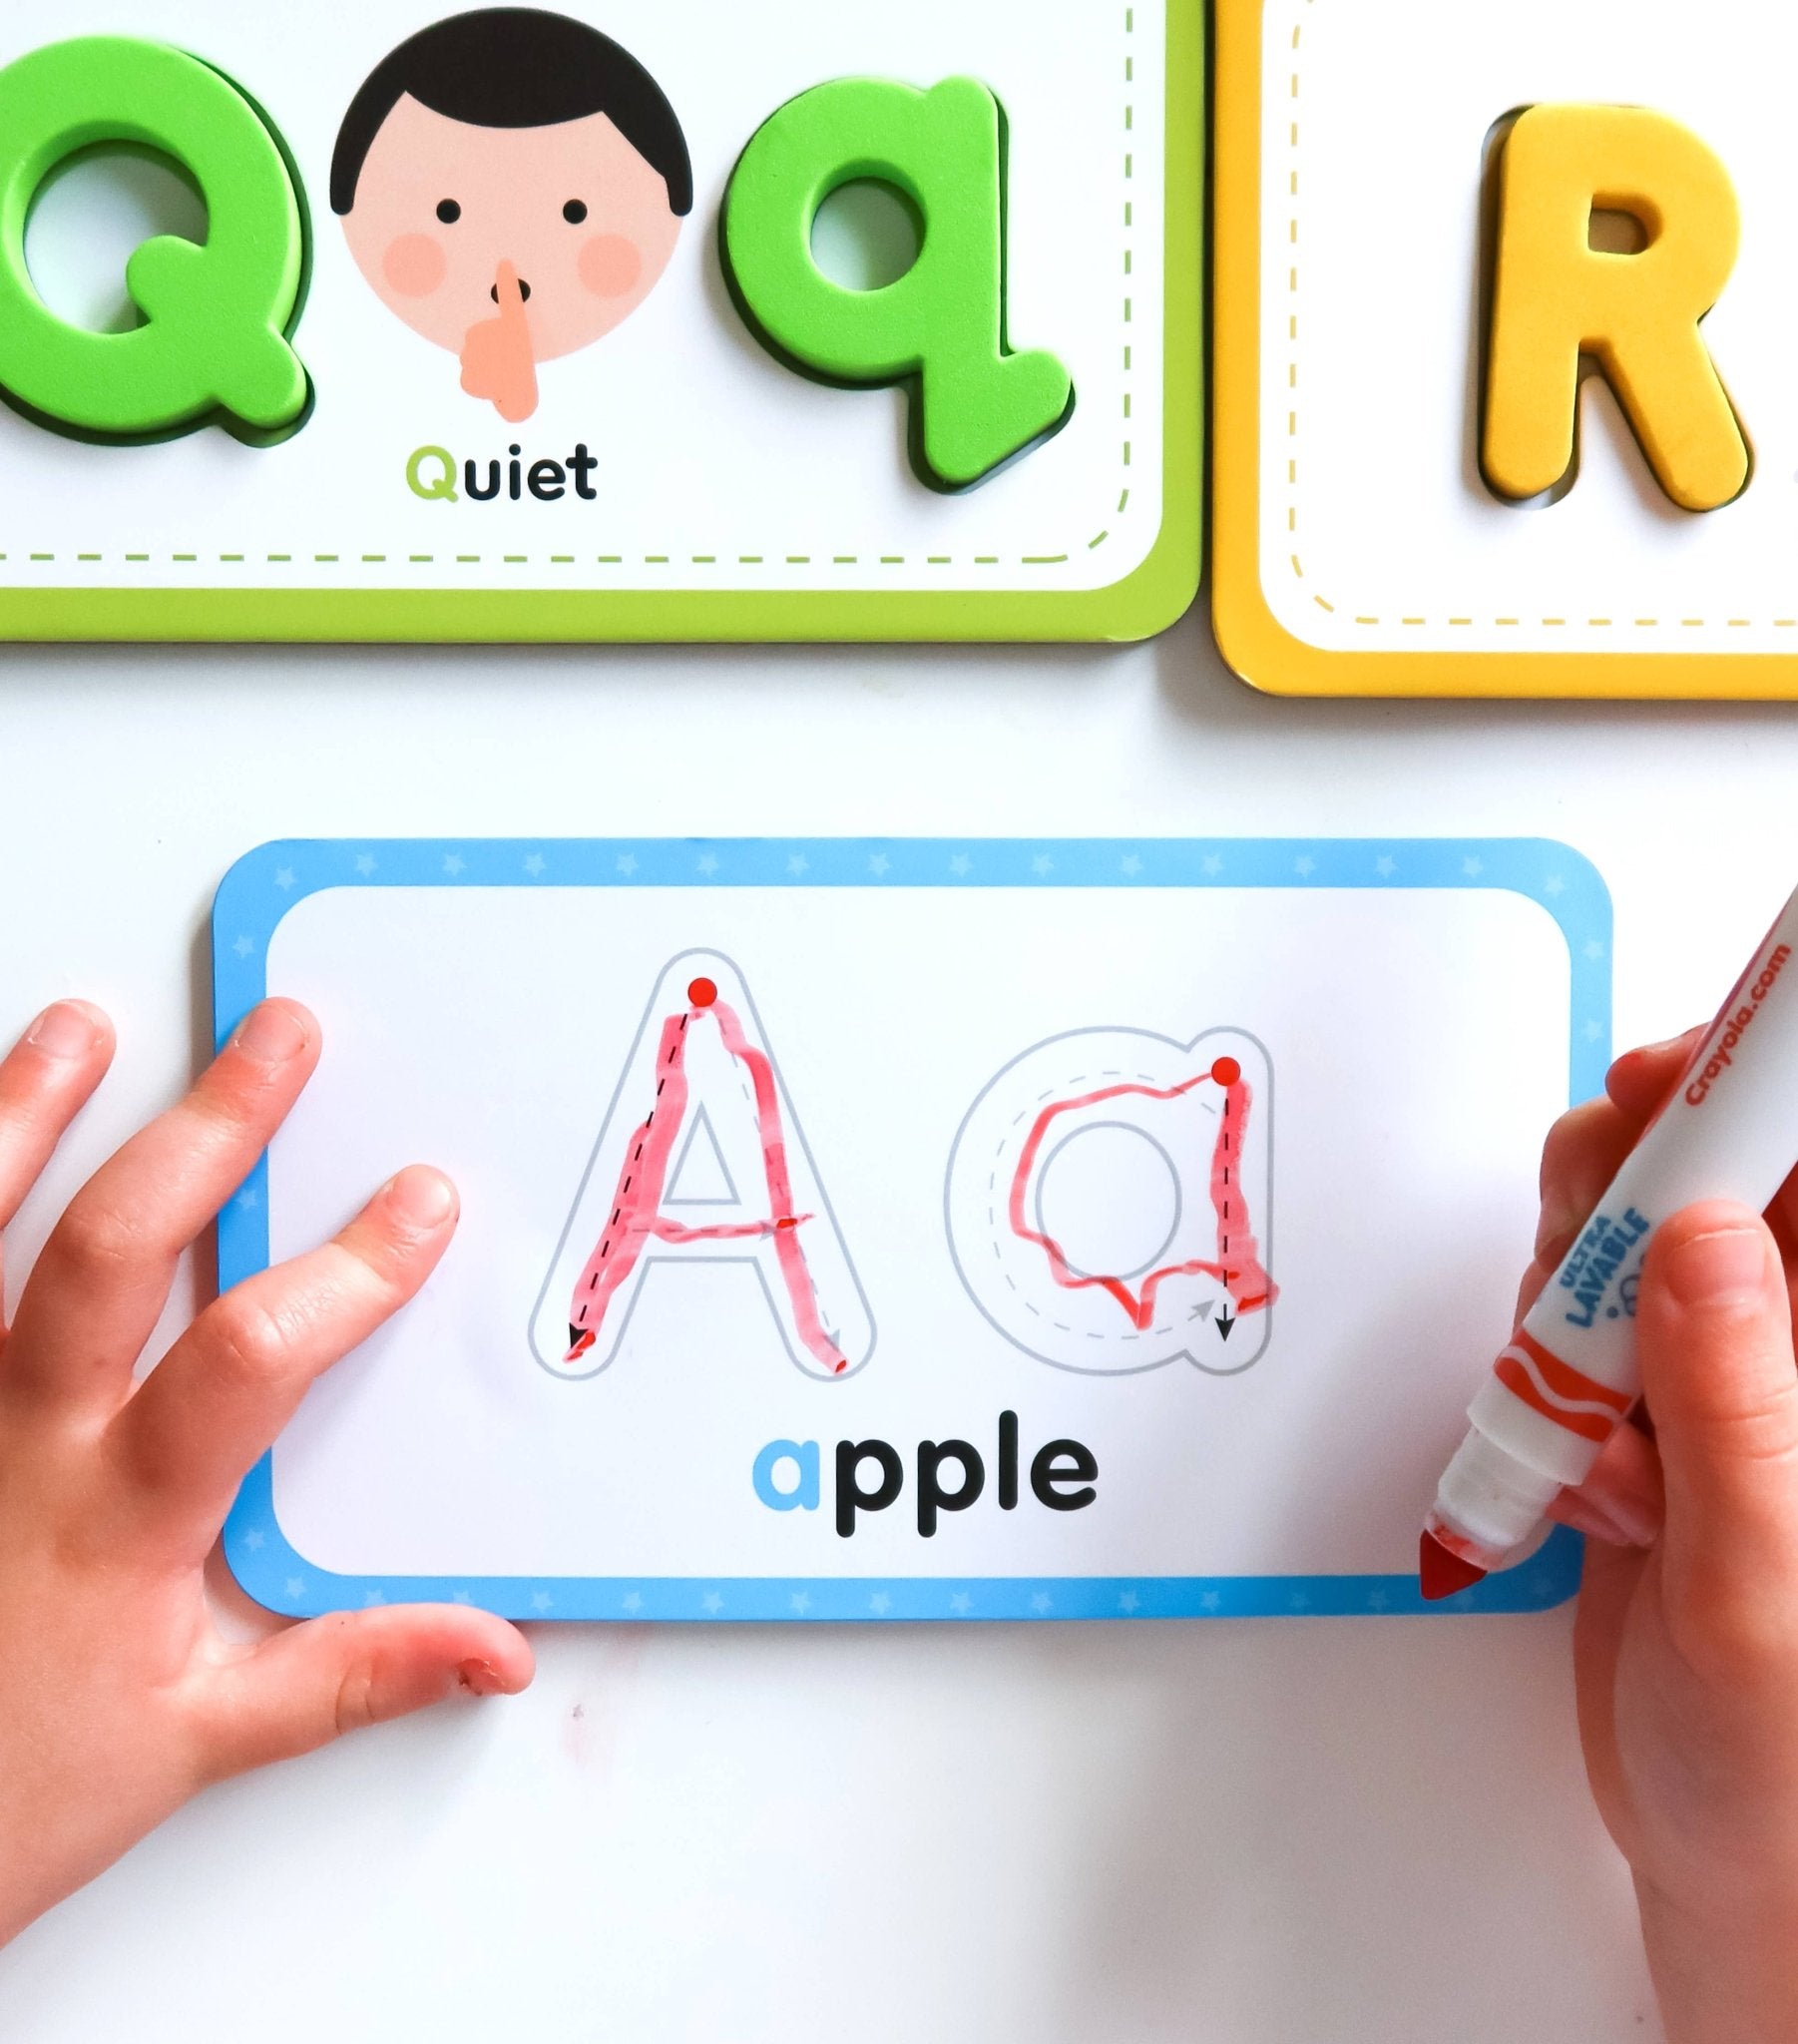 Flashcards & ABC Magnetic Letters